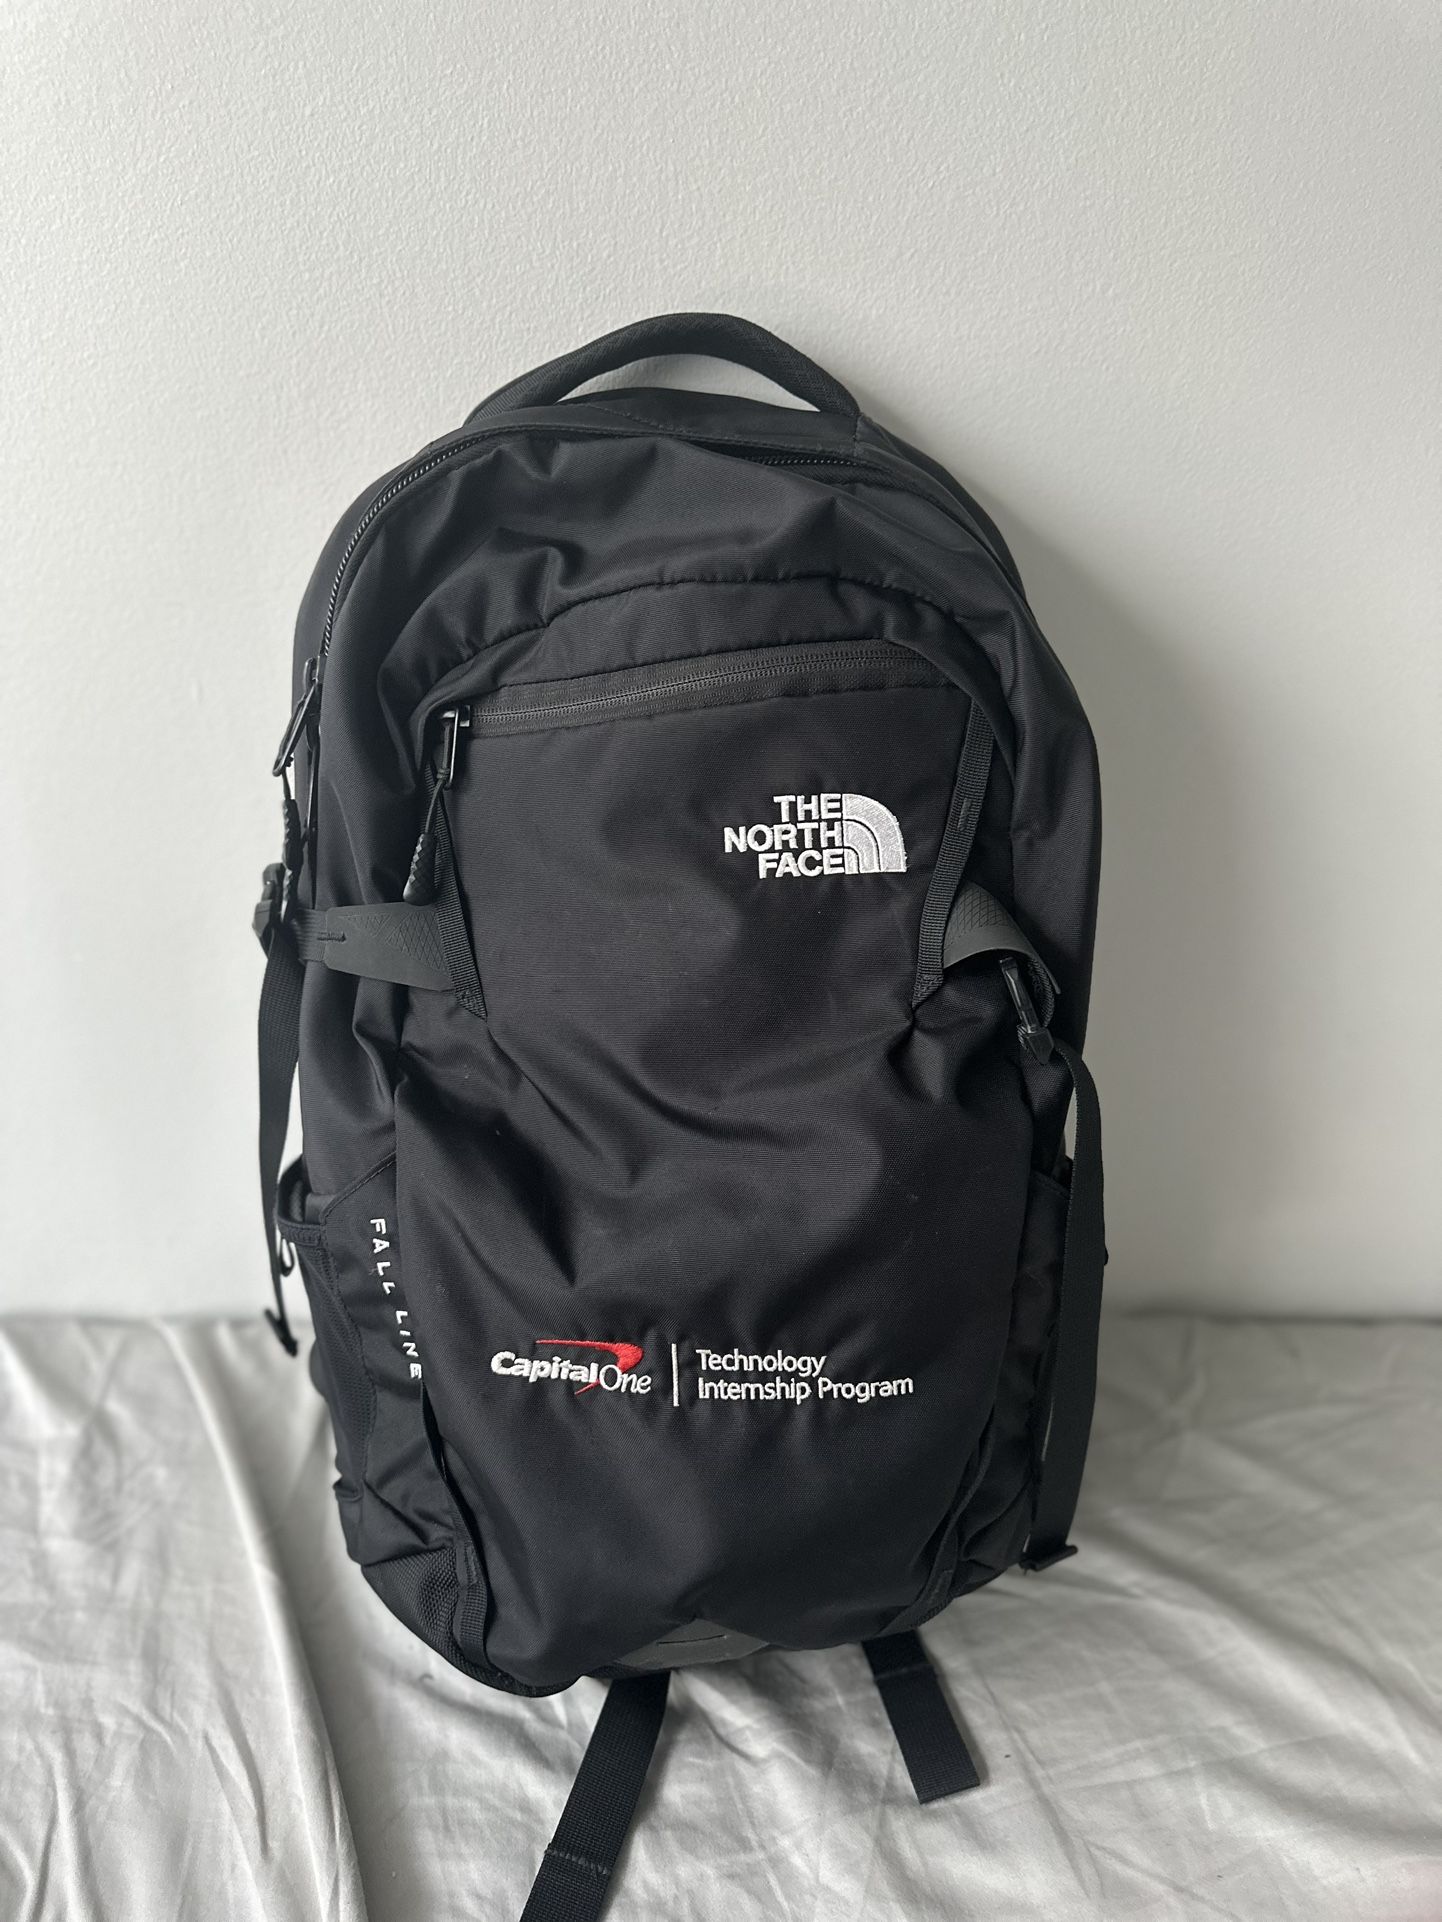 NORTHFACE BACKPACK 